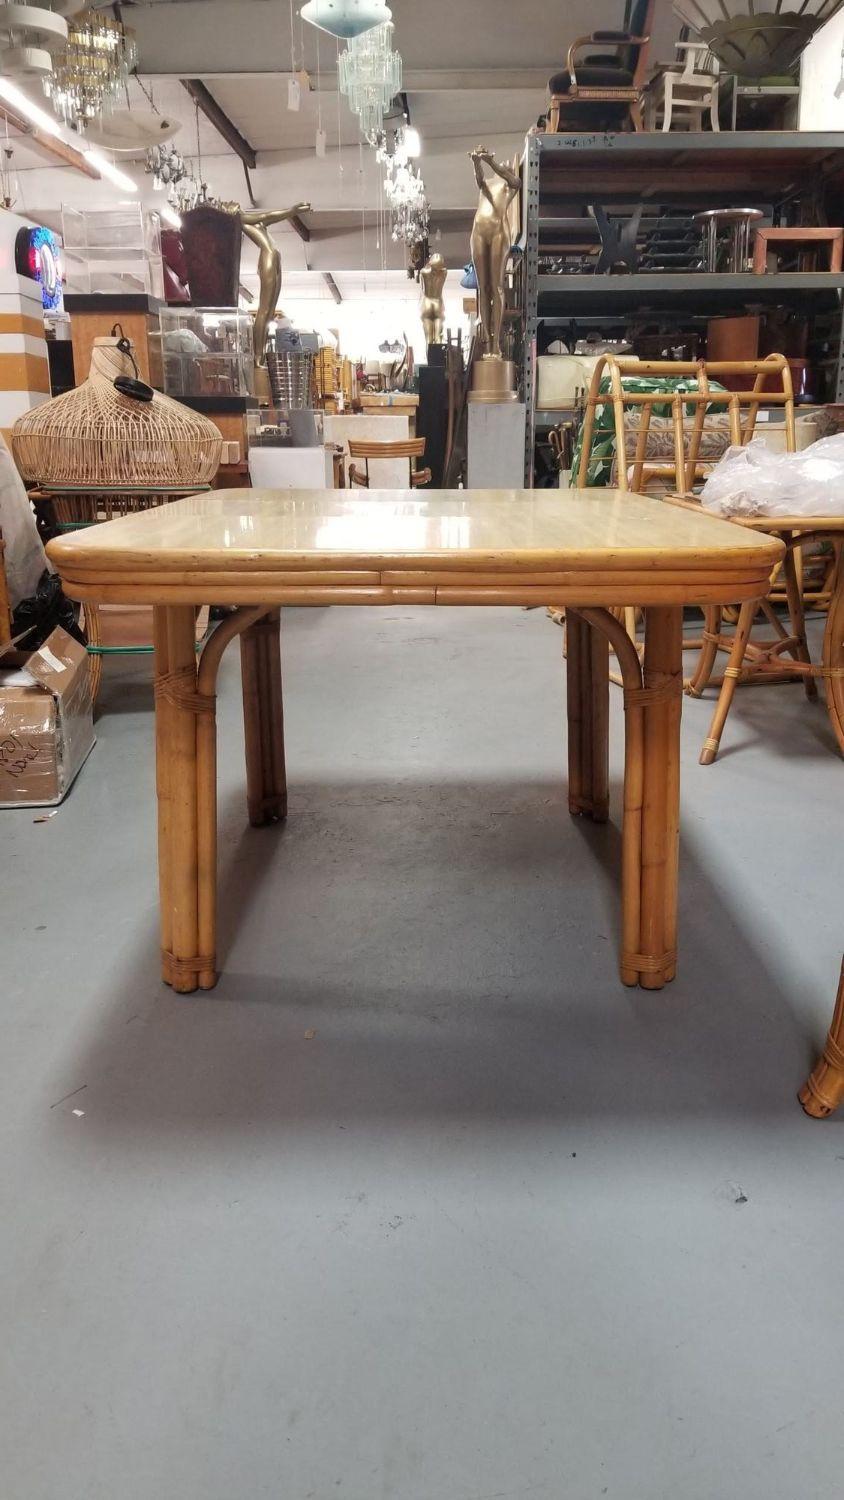 Mid-Century restored rattan dining table with a light wood color Formica top and a middle removable leaf. Measurements and photos are taken at full length with leaf.

Without the 16